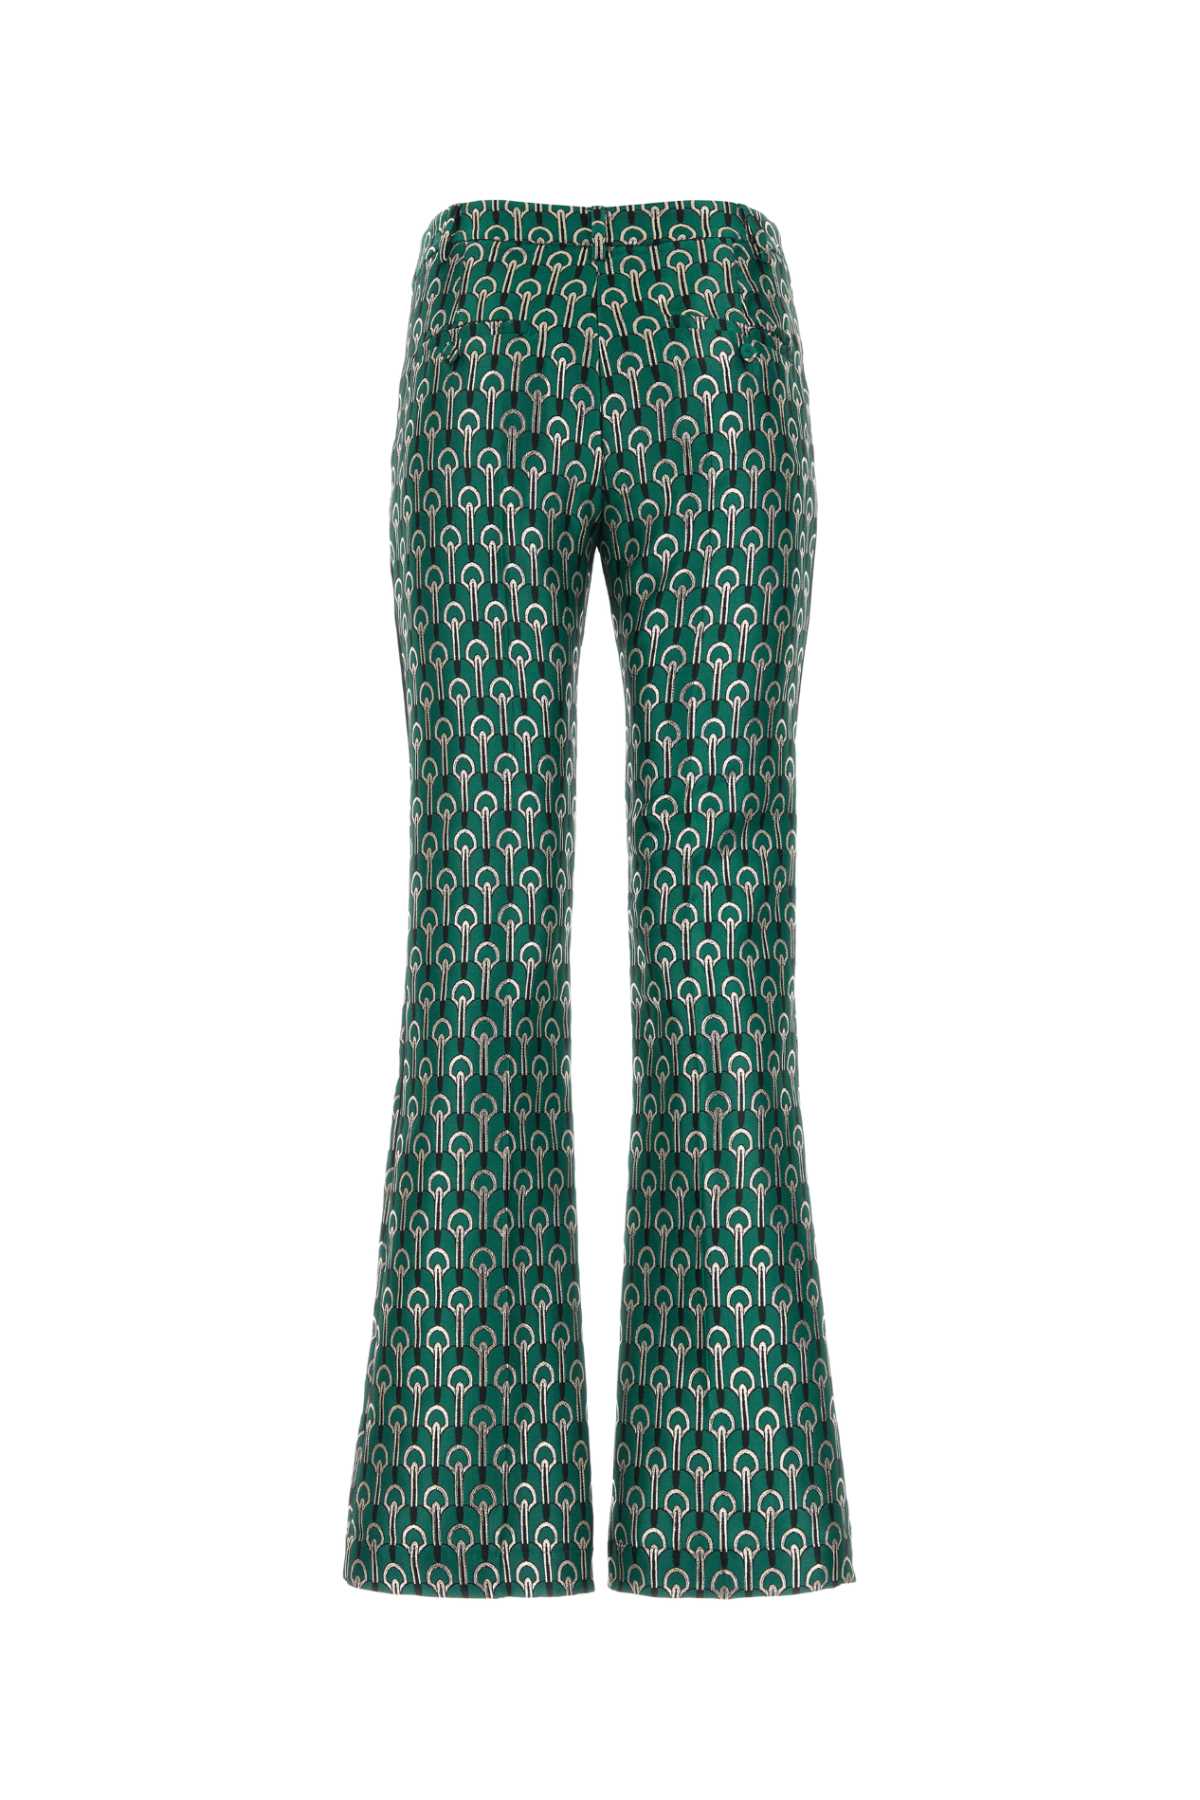 Weekend Max Mara Embroidered Polyester Blend Girino Pant In 001